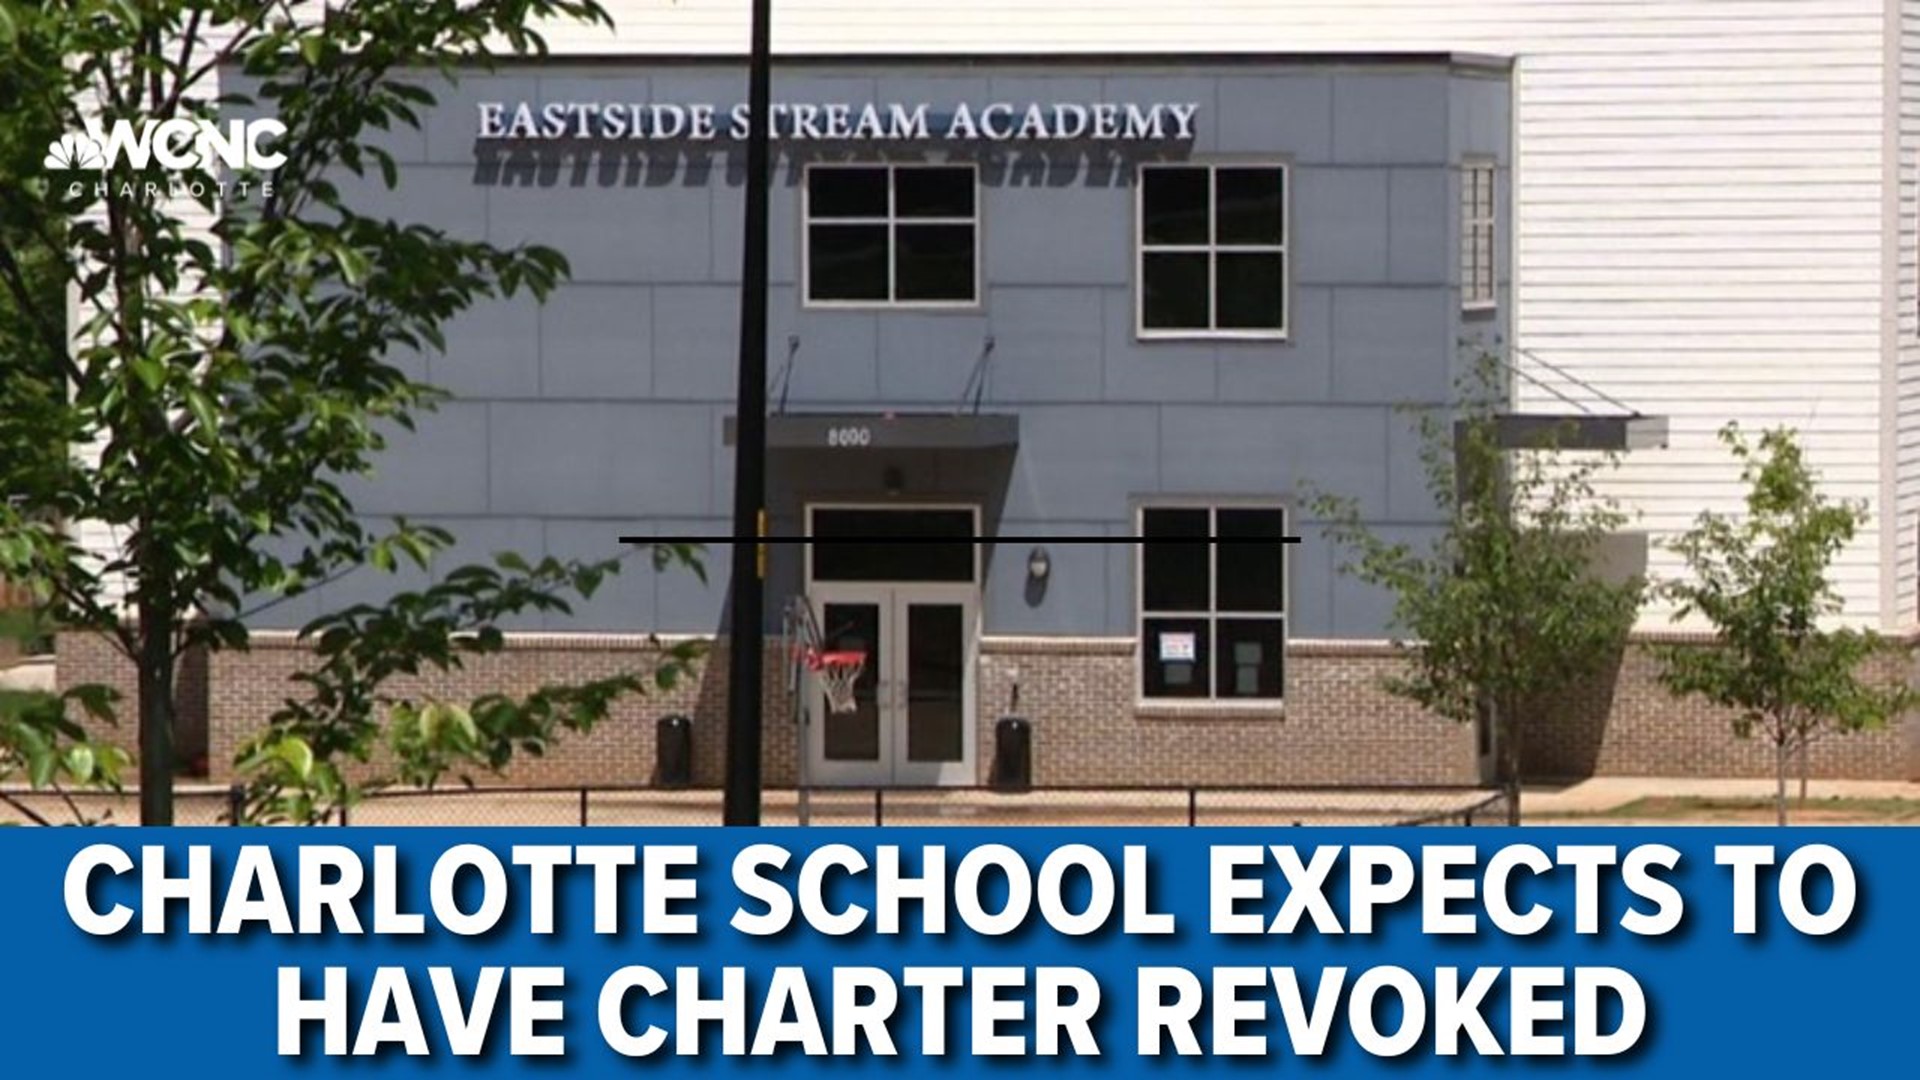 This comes after the Office of Charter Schools cited failing grades, staff turnover, and fiscal mismanagement as reasons to not renew the school's charter.